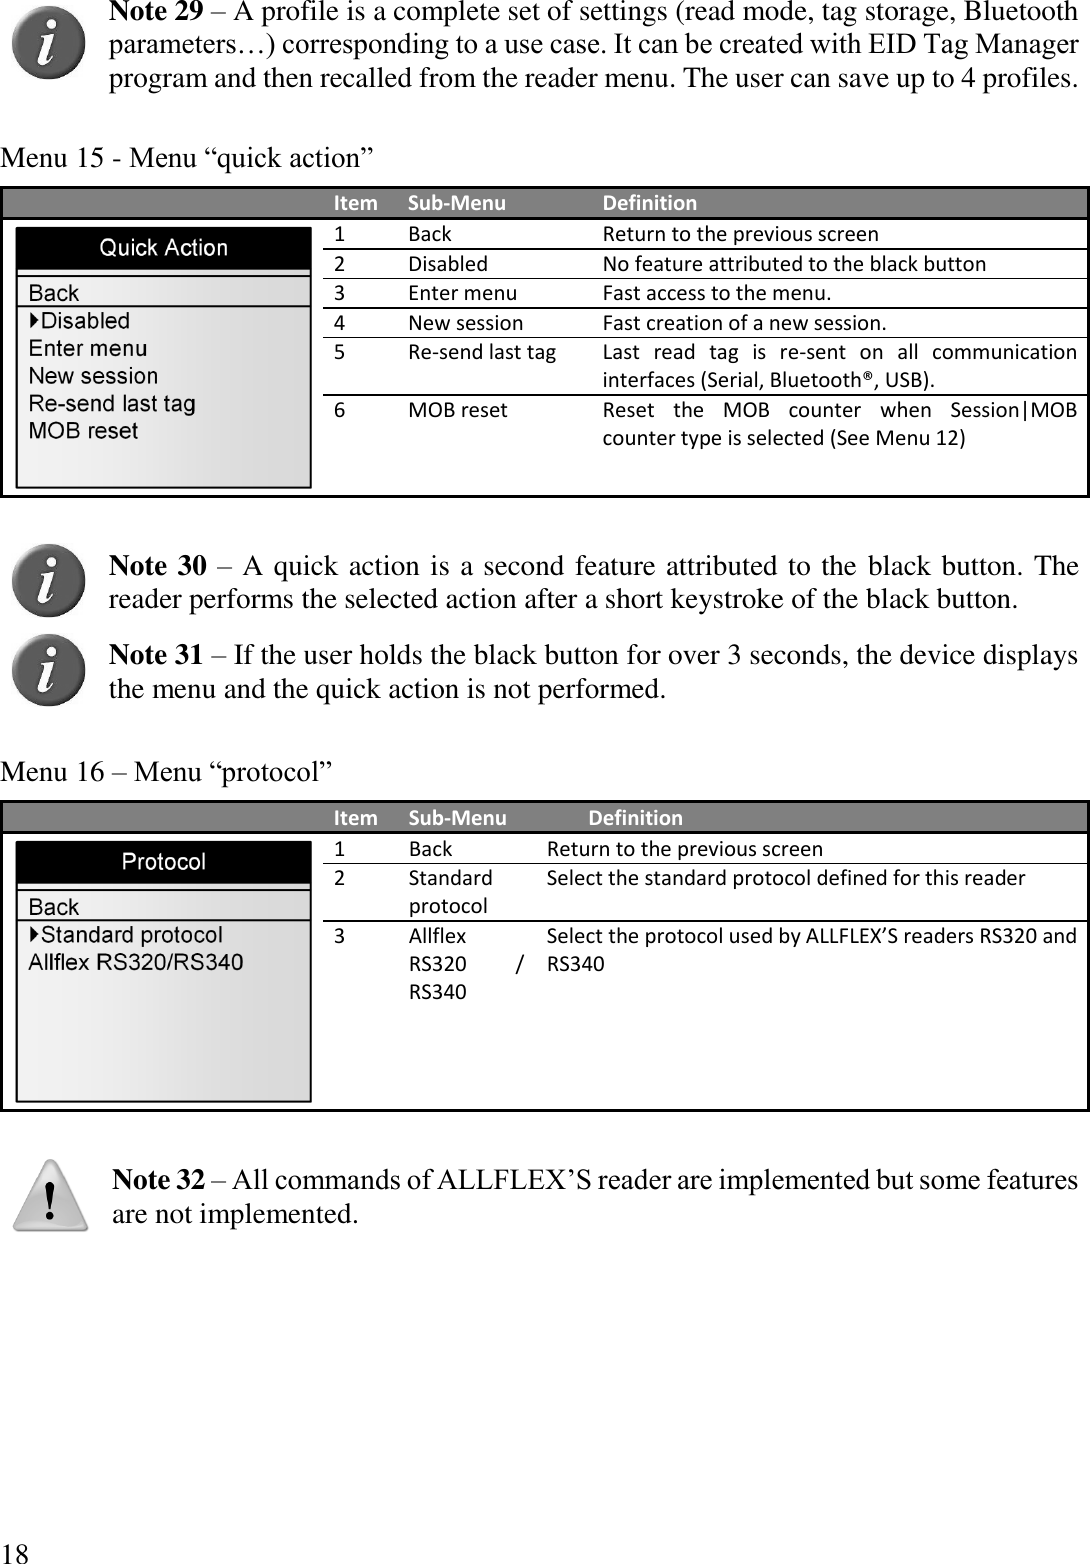 18  Note 29 – A profile is a complete set of settings (read mode, tag storage, Bluetooth parameters…) corresponding to a use case. It can be created with EID Tag Manager program and then recalled from the reader menu. The user can save up to 4 profiles.  Menu 15 - Menu “quick action”  Item Sub-Menu Definition  1 Back Return to the previous screen 2 Disabled No feature attributed to the black button 3 Enter menu Fast access to the menu. 4 New session Fast creation of a new session. 5 Re-send last tag Last  read  tag  is  re-sent  on  all  communication interfaces (Serial, Bluetooth®, USB). 6 MOB reset Reset  the  MOB  counter  when  Session|MOB counter type is selected (See Menu 12)   Note 30 – A quick action is a second feature attributed to the black button. The reader performs the selected action after a short keystroke of the black button.    Note 31 – If the user holds the black button for over 3 seconds, the device displays the menu and the quick action is not performed.  Menu 16 – Menu “protocol”  Item Sub-Menu Definition  1 Back Return to the previous screen 2 Standard protocol Select the standard protocol defined for this reader 3 Allflex RS320  / RS340 Select the protocol used by ALLFLEX’S readers RS320 and RS340   Note 32 – All commands of ALLFLEX’S reader are implemented but some features are not implemented.    